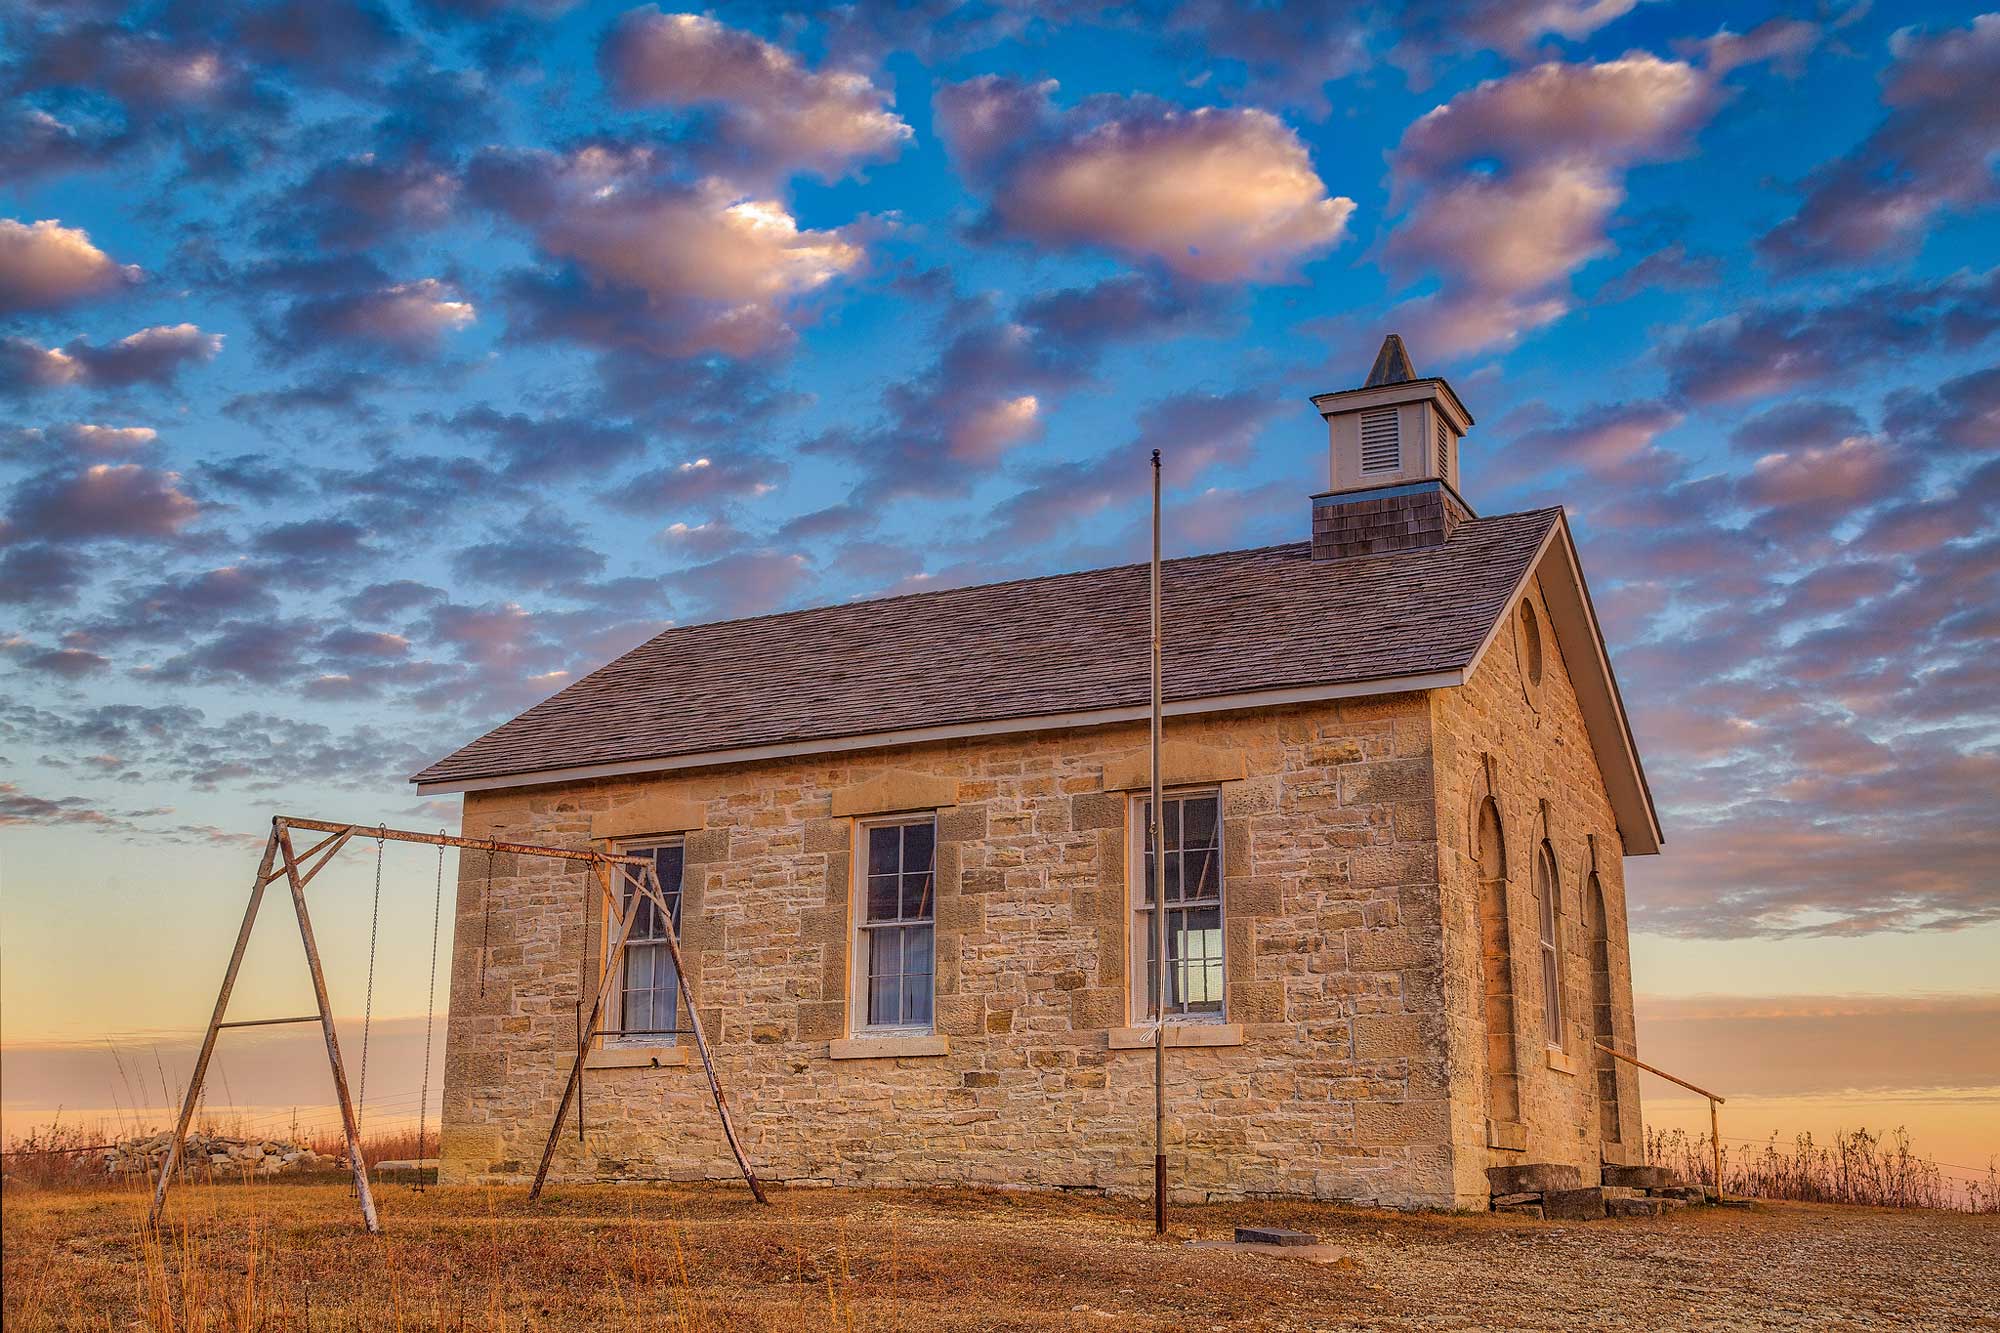 Photograph of the Lower Fox Creek Schoolhouse at Tallgrass Prairie National Preserve. The schoolhouse is built from Flint Hills limestone.